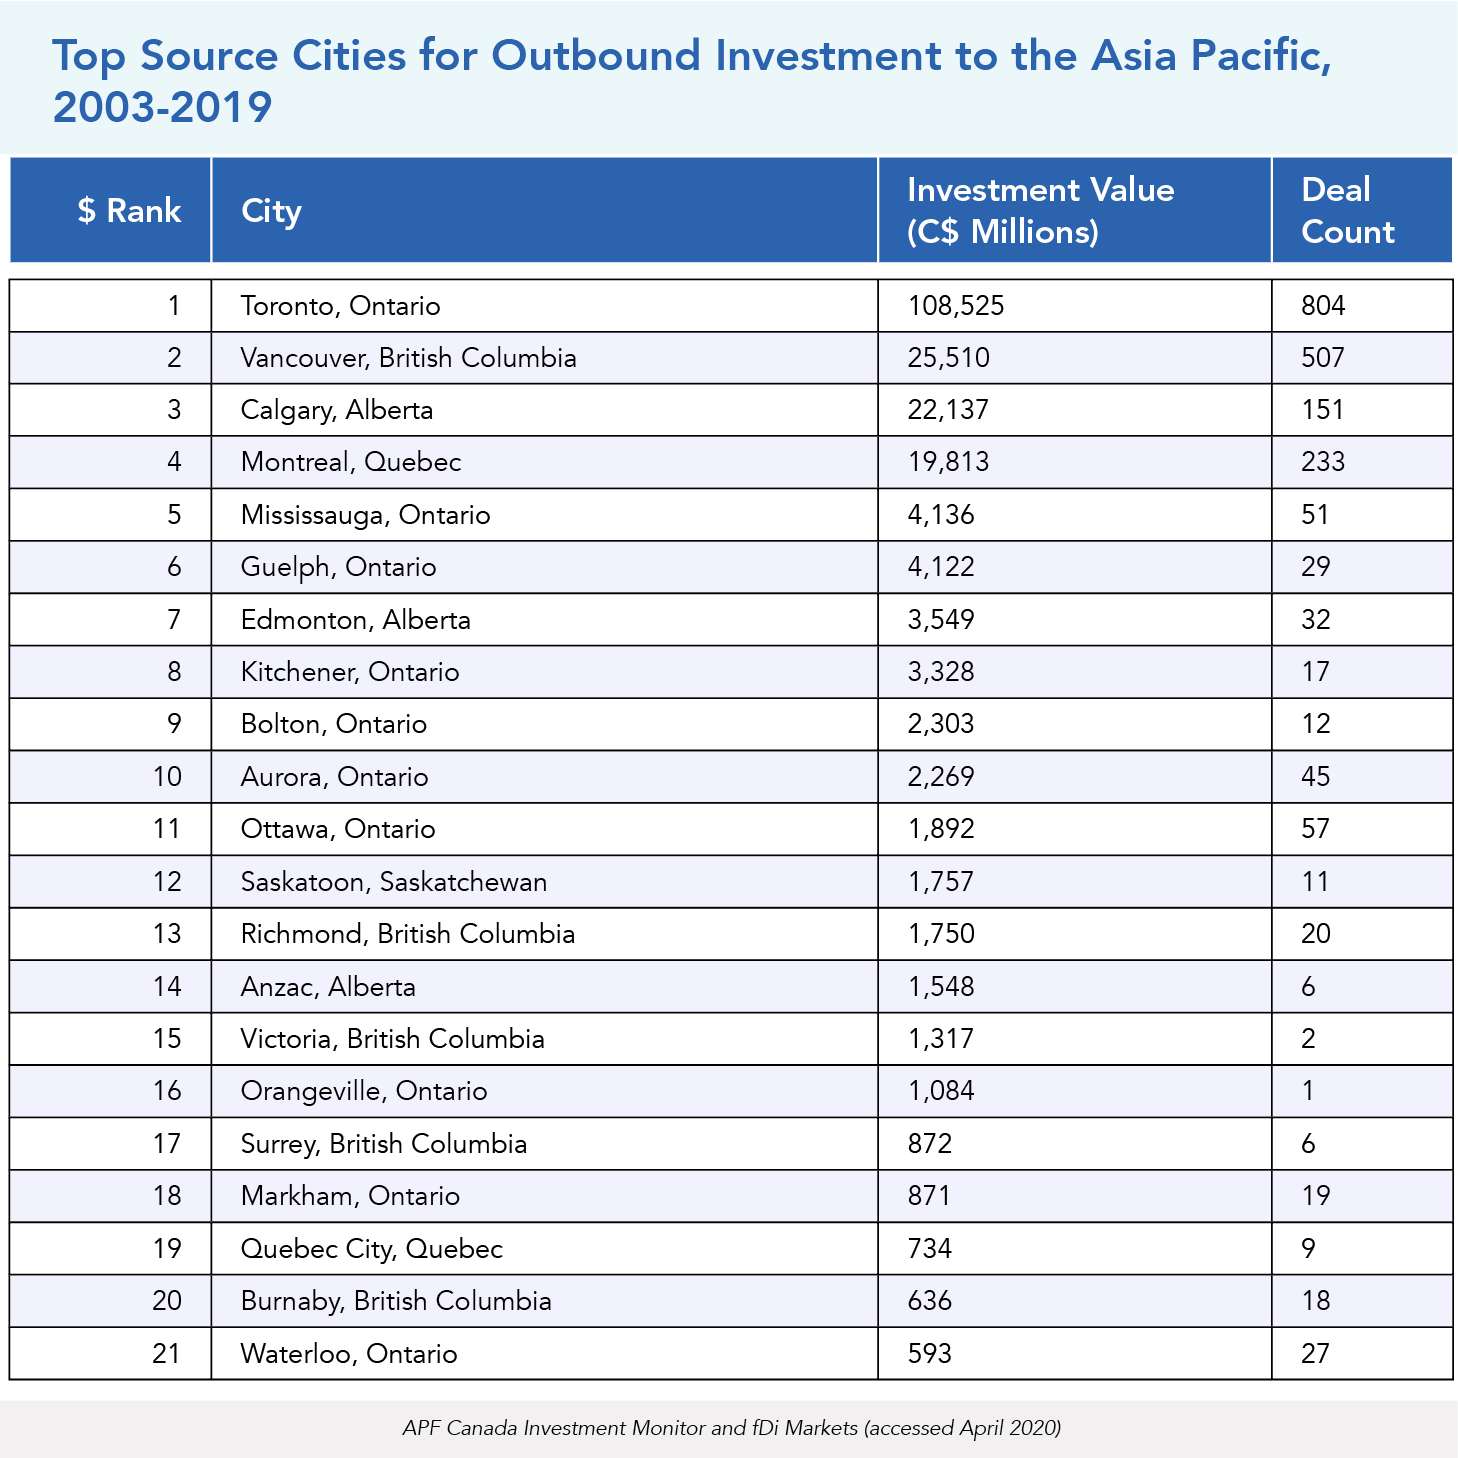 Top Source Cities of Outbound Investment to the Asia Pacific, 2003-2019